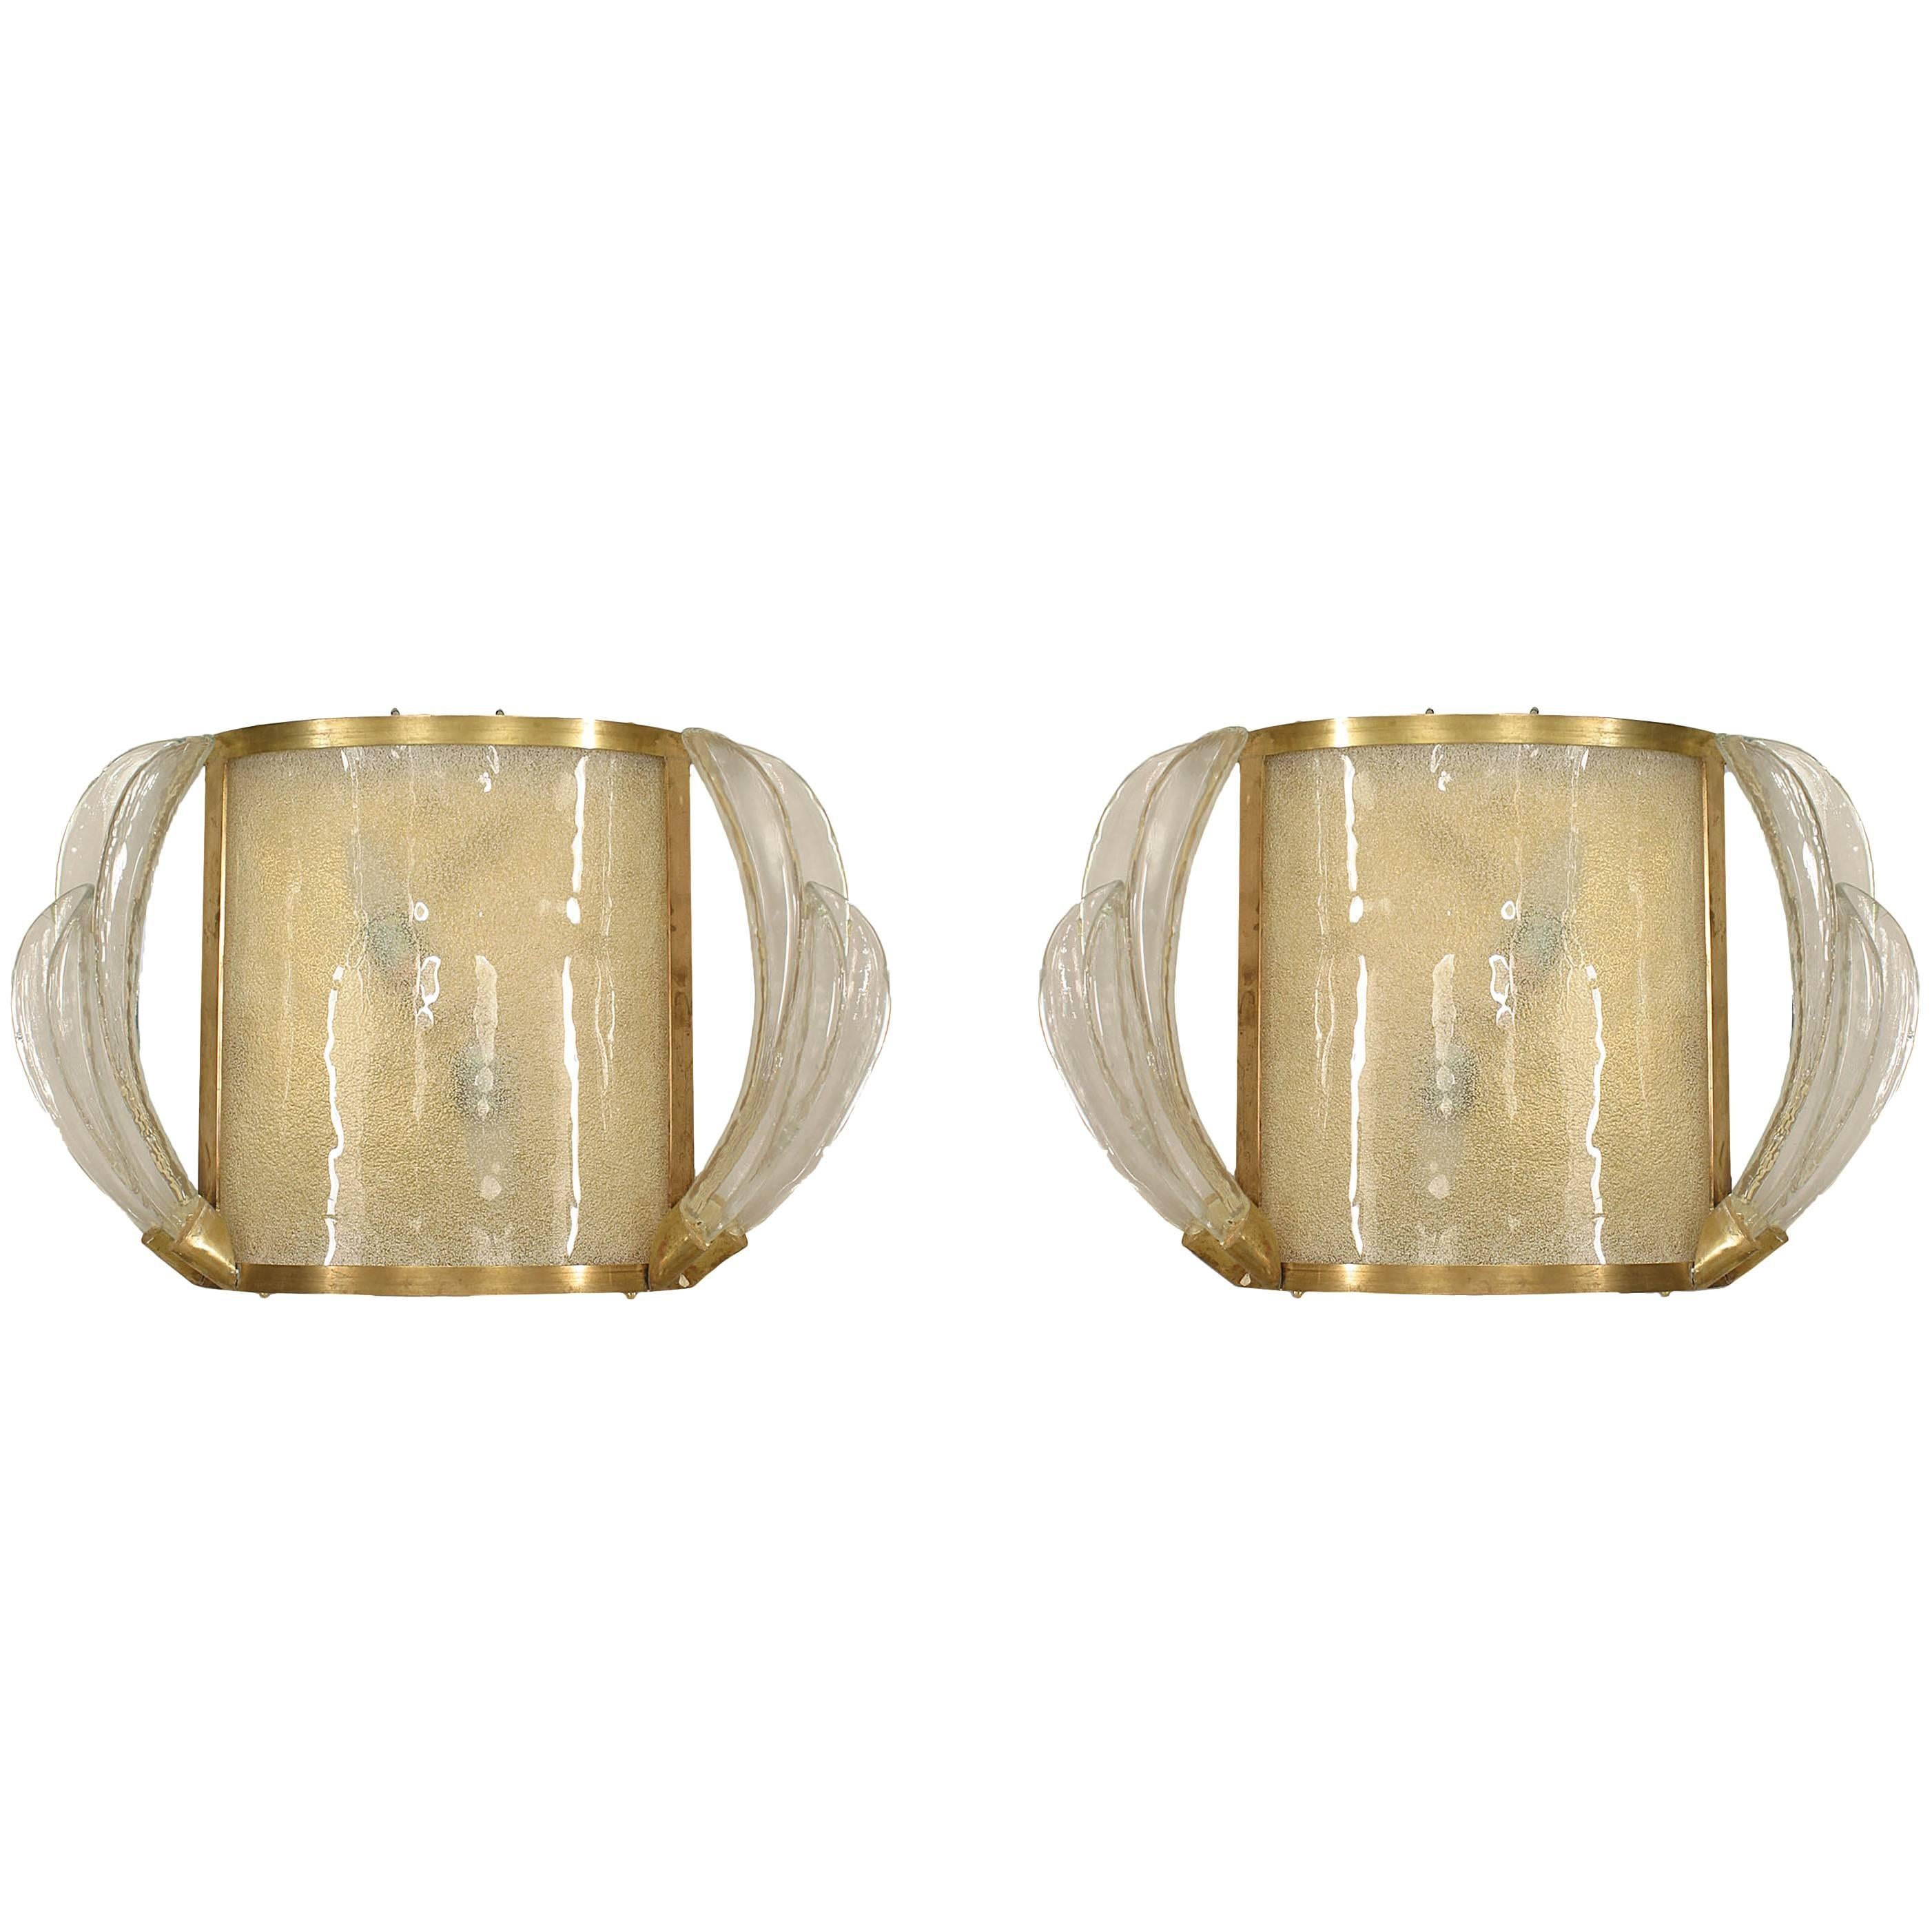 Pair of French Mid-Century Murano Glass and Brass Wall Sconces